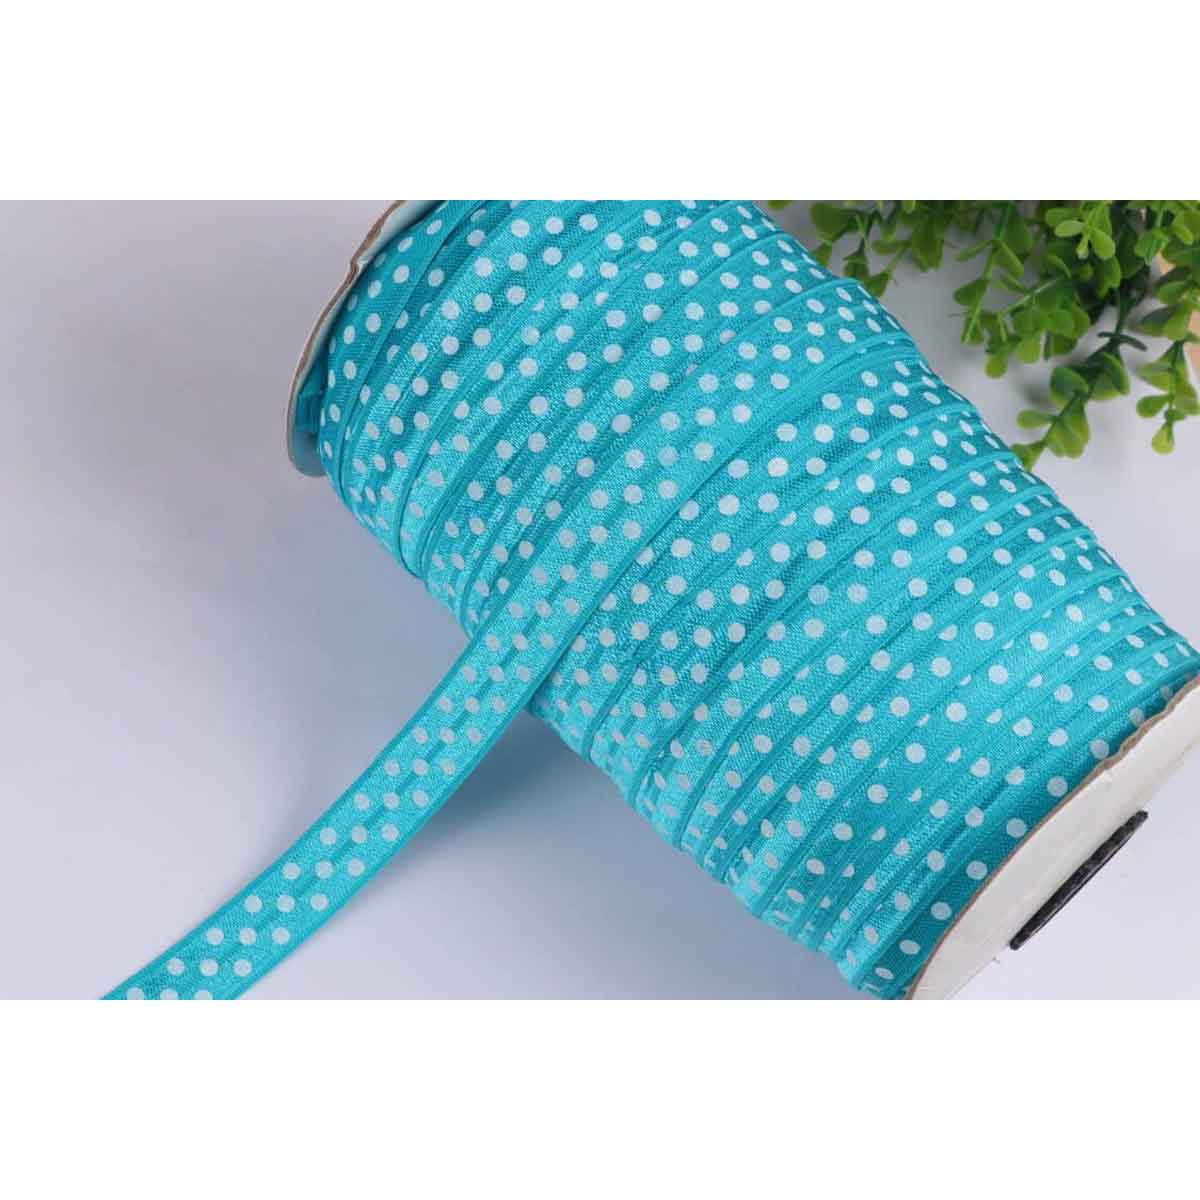 “One Roll”100Yards Polka Dots Elastic Ribbon 5/8″-Turquoise/White Dots